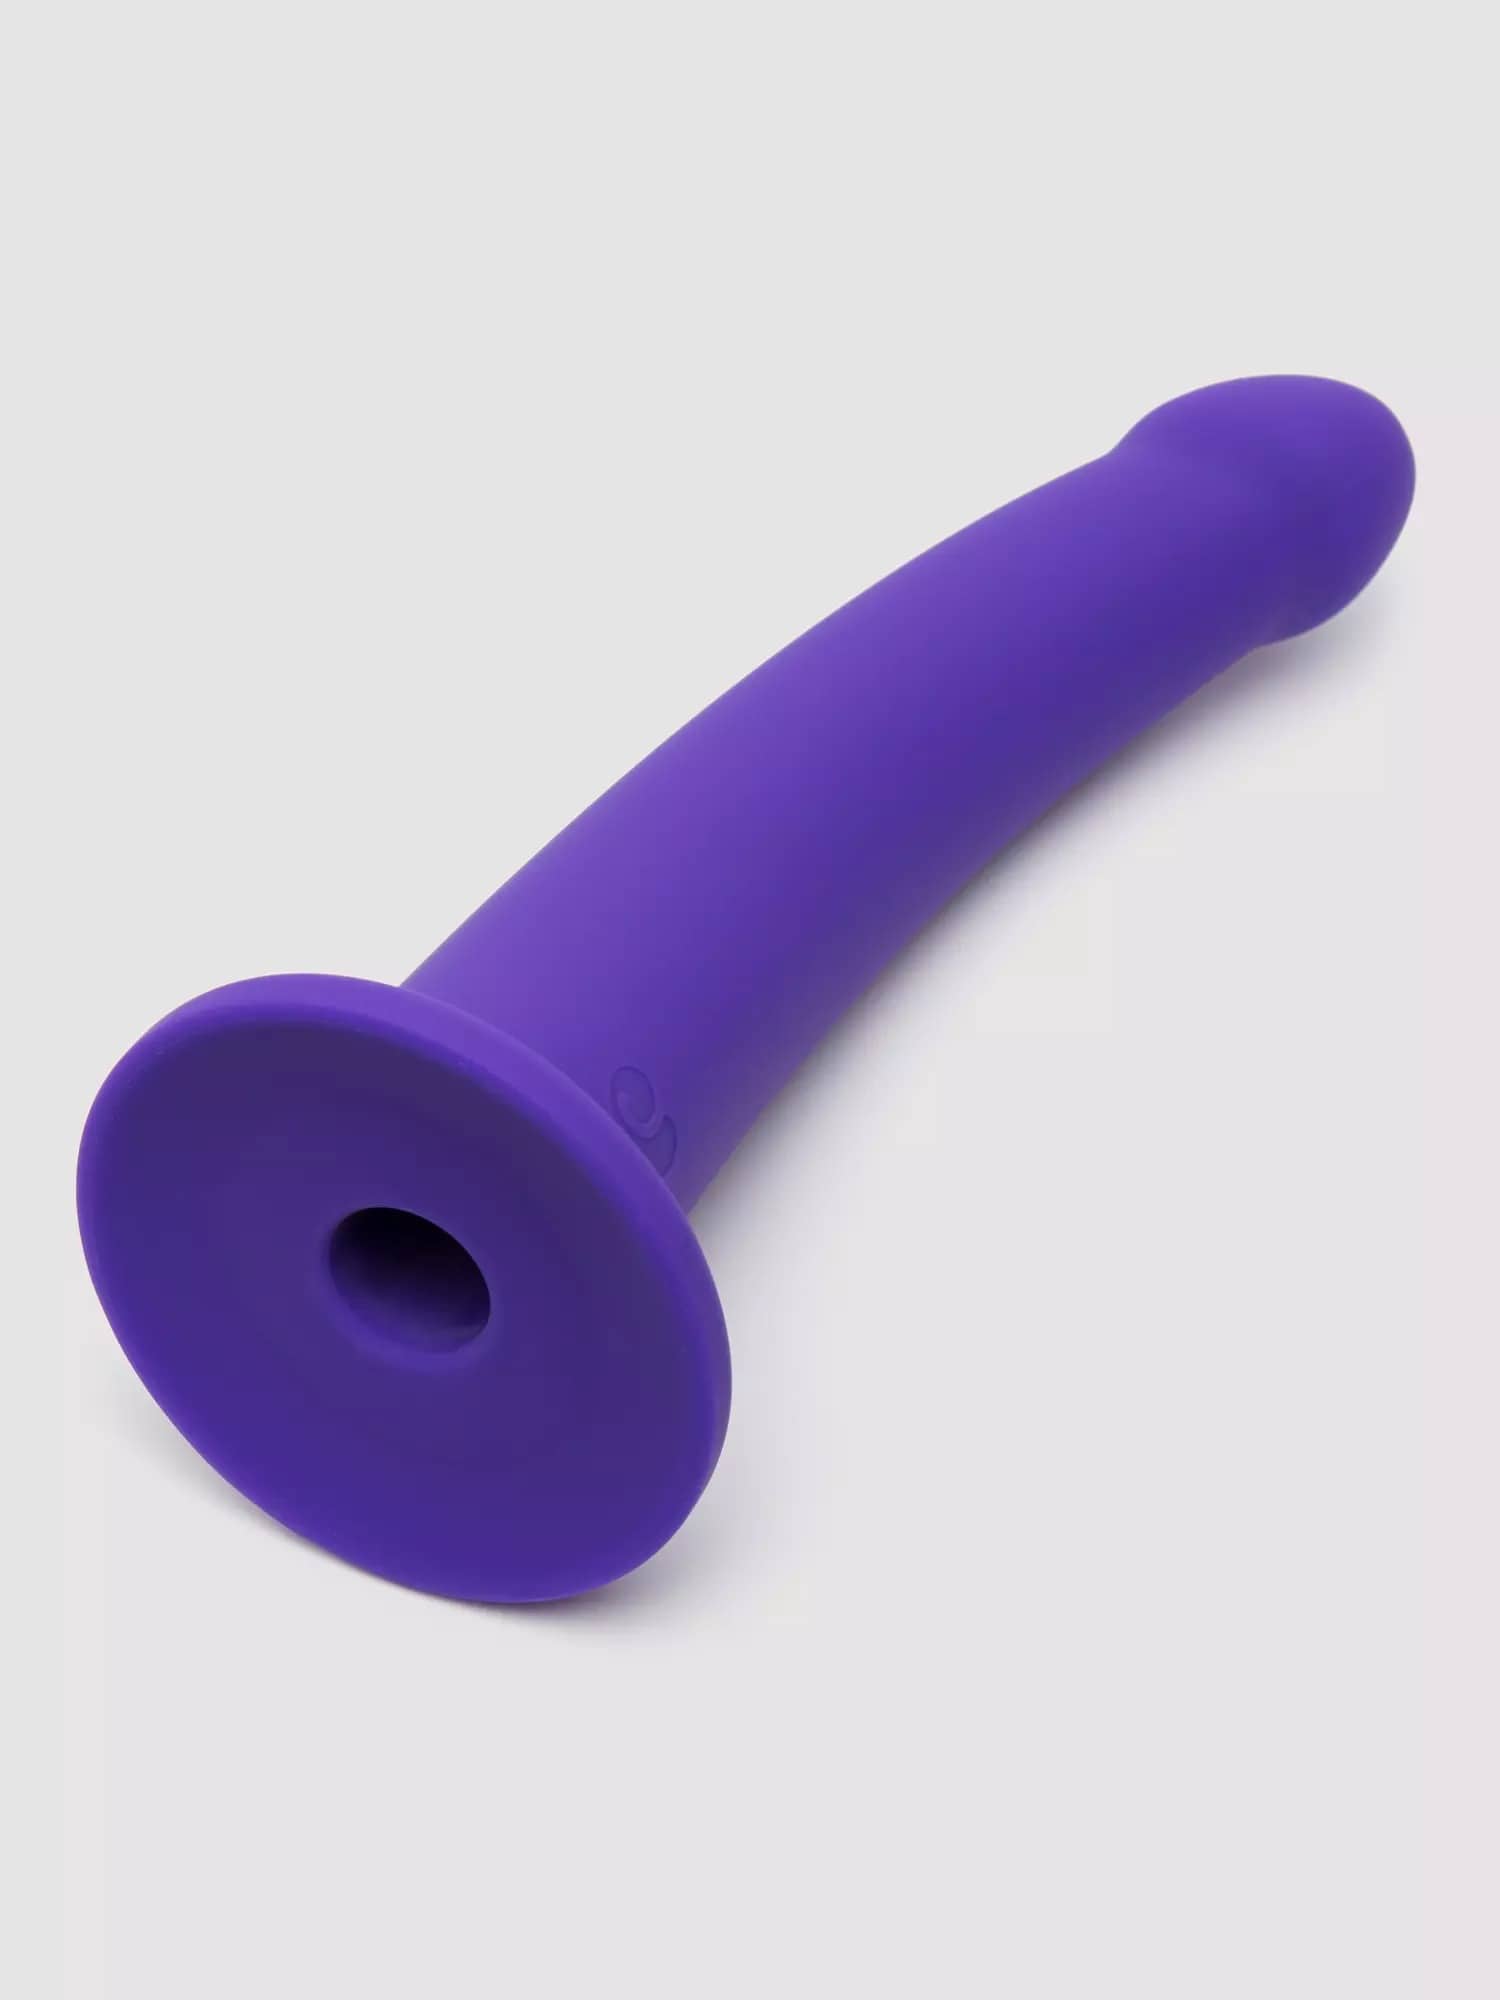 Lovehoney Curved Silicone Suction Cup Dildo 7 Inch. Slide 3